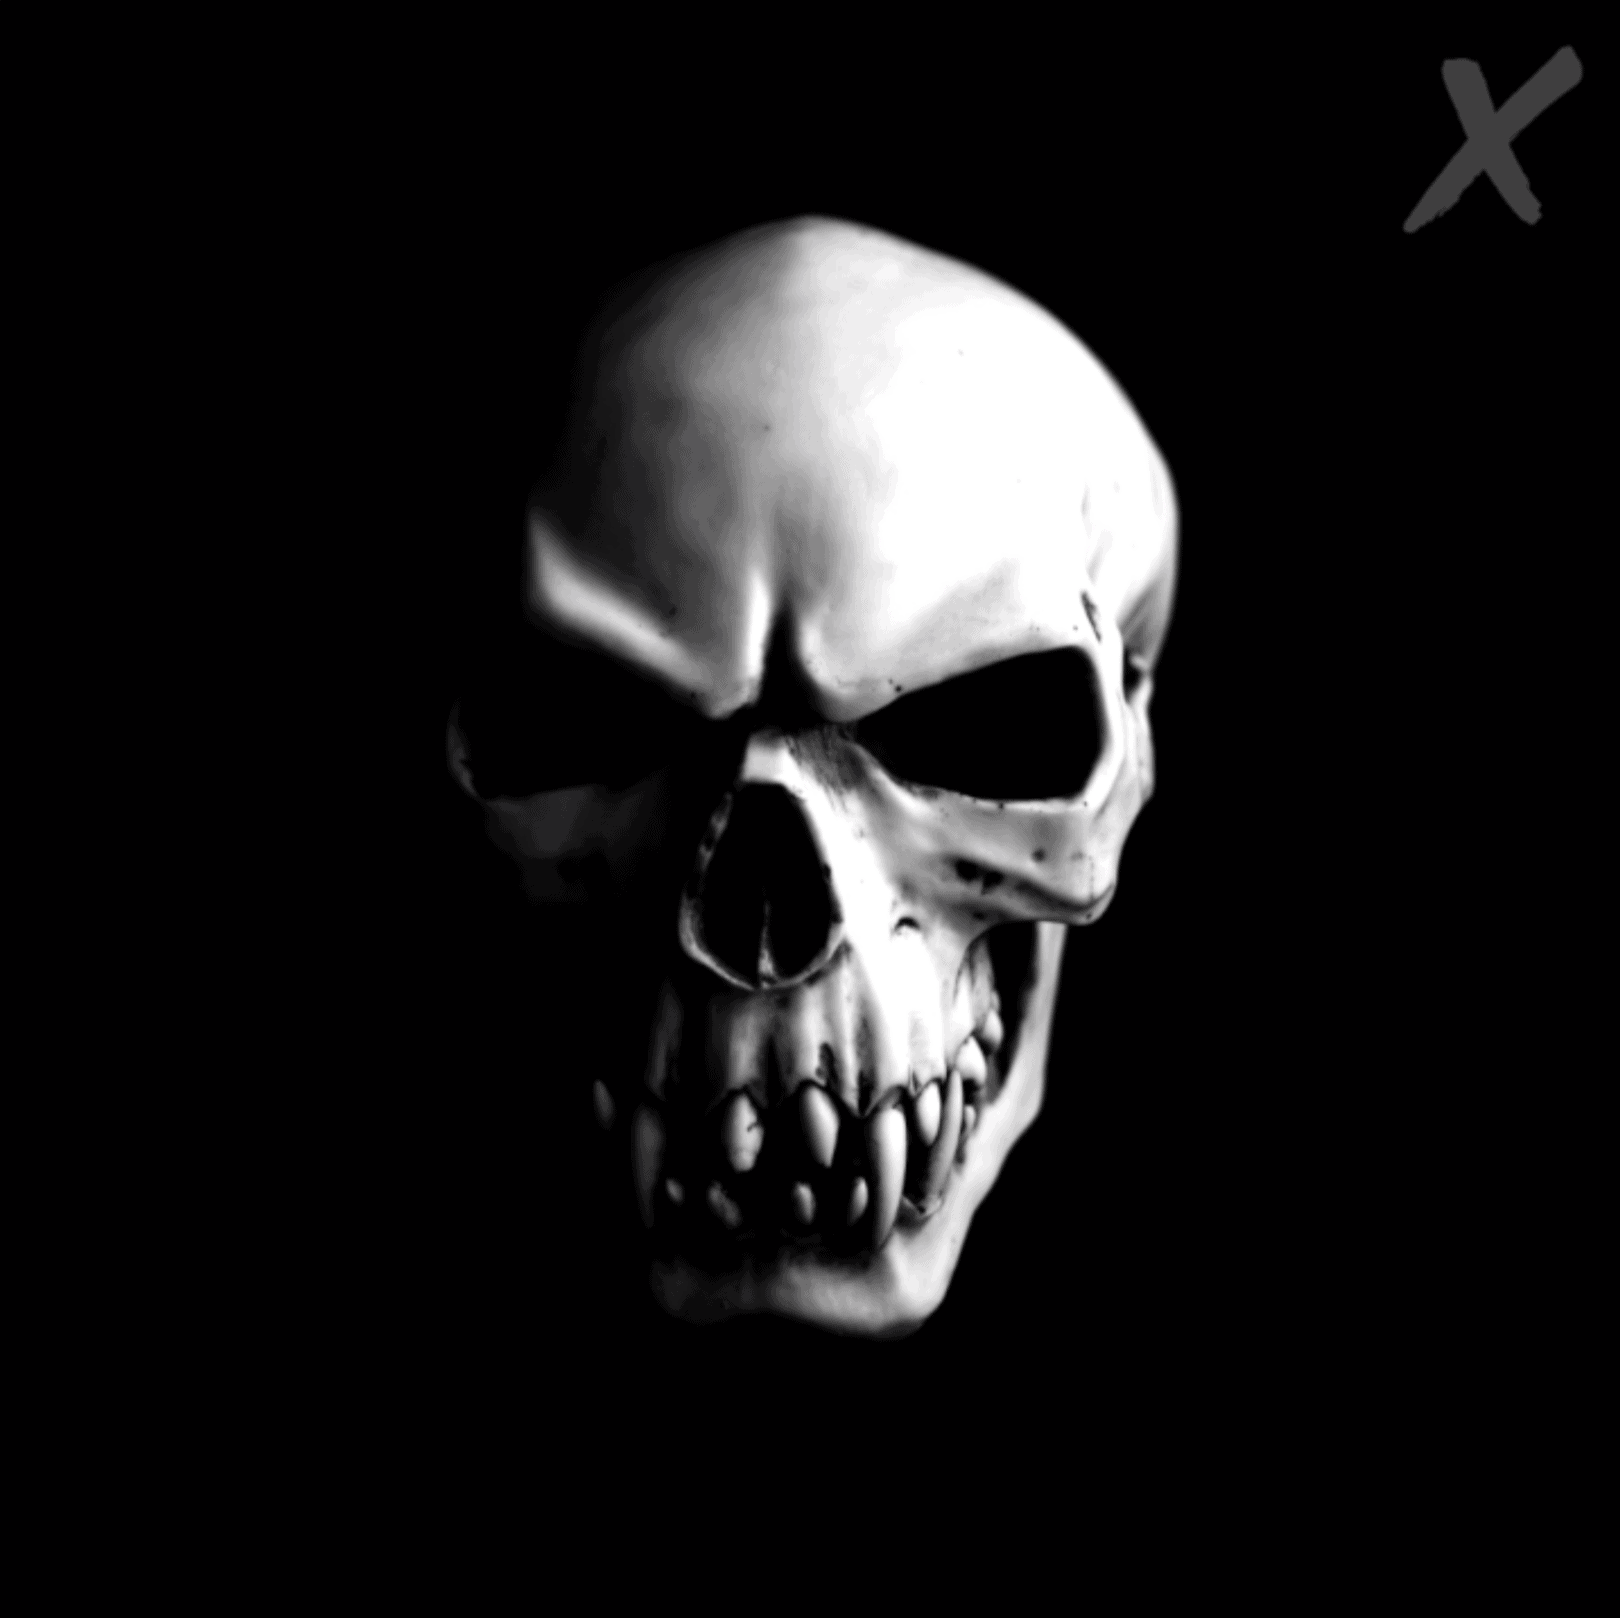 Skull with fangs, a still image taken from an animated Instagram campaign by Wonderlab.